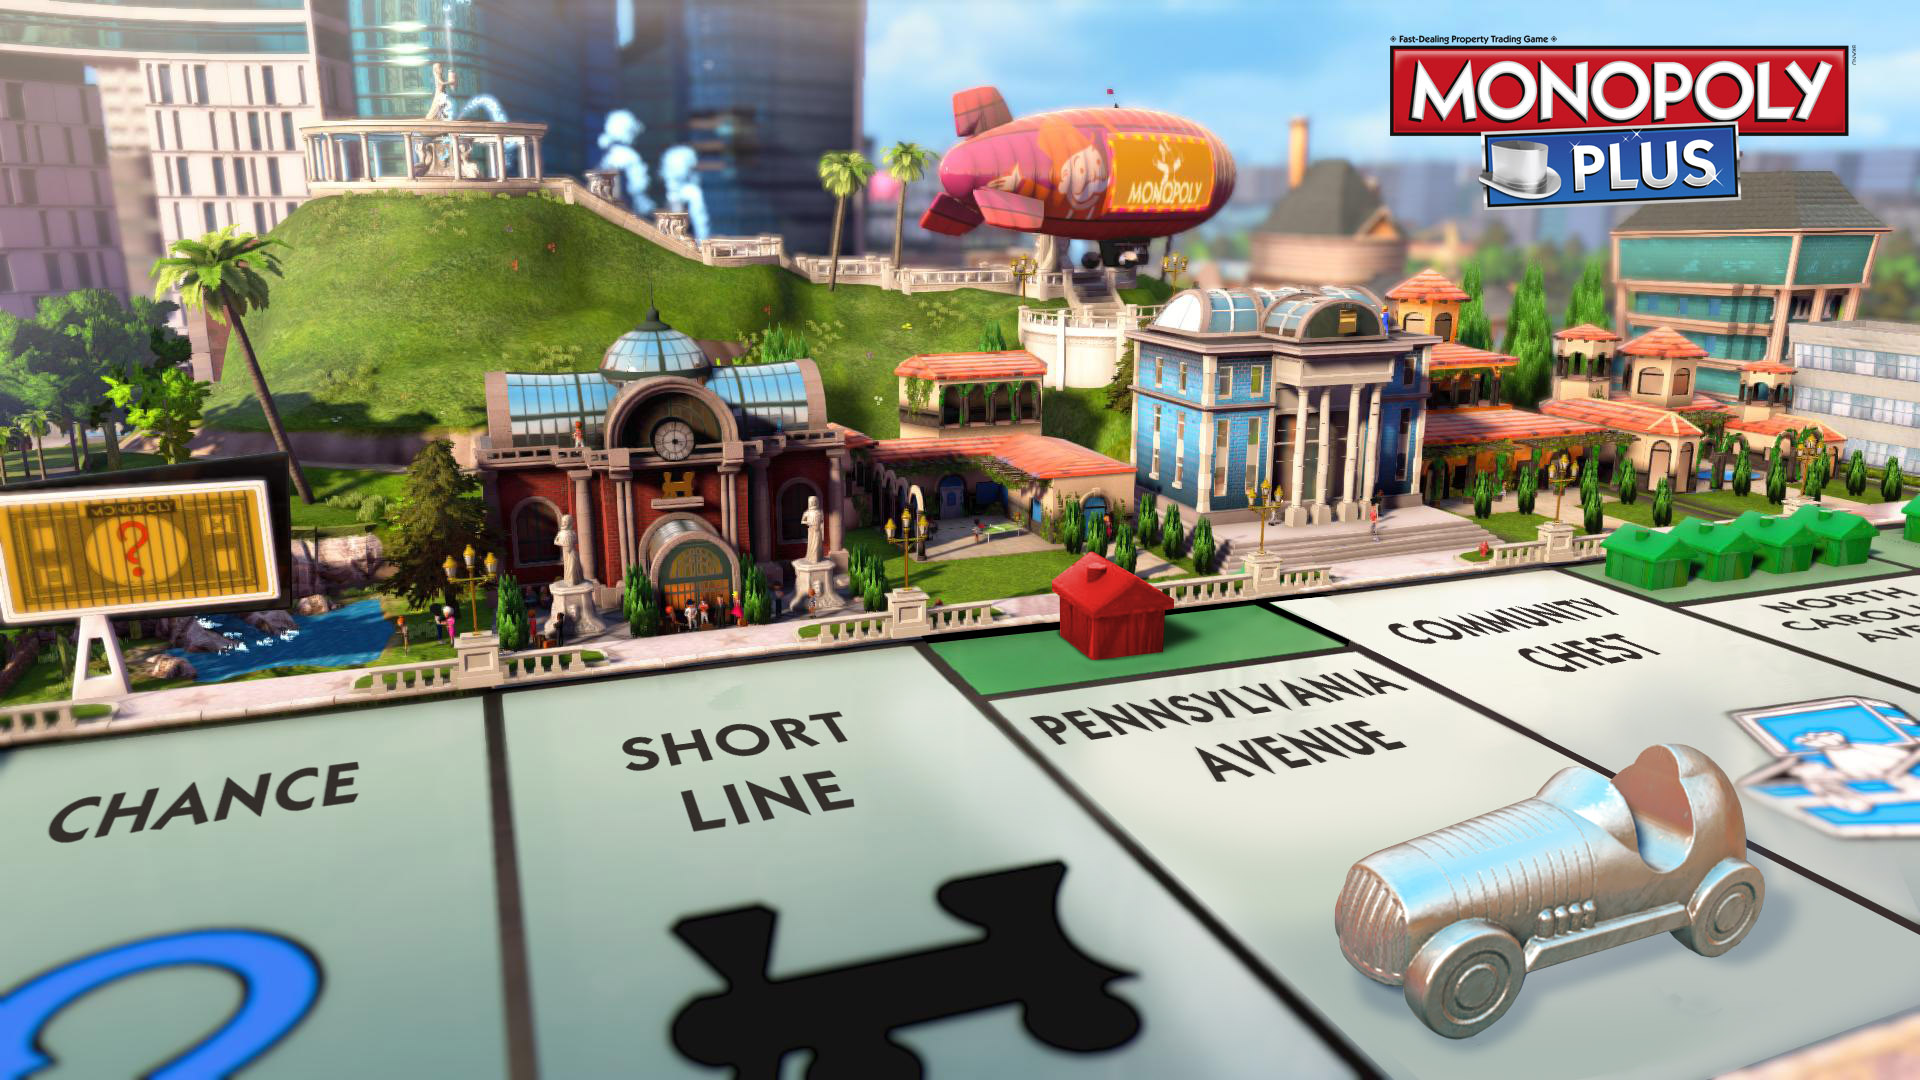 MONOPOLY FAMILY FUN PACK HEADING TO RETAIL FOR HOLIDAYS